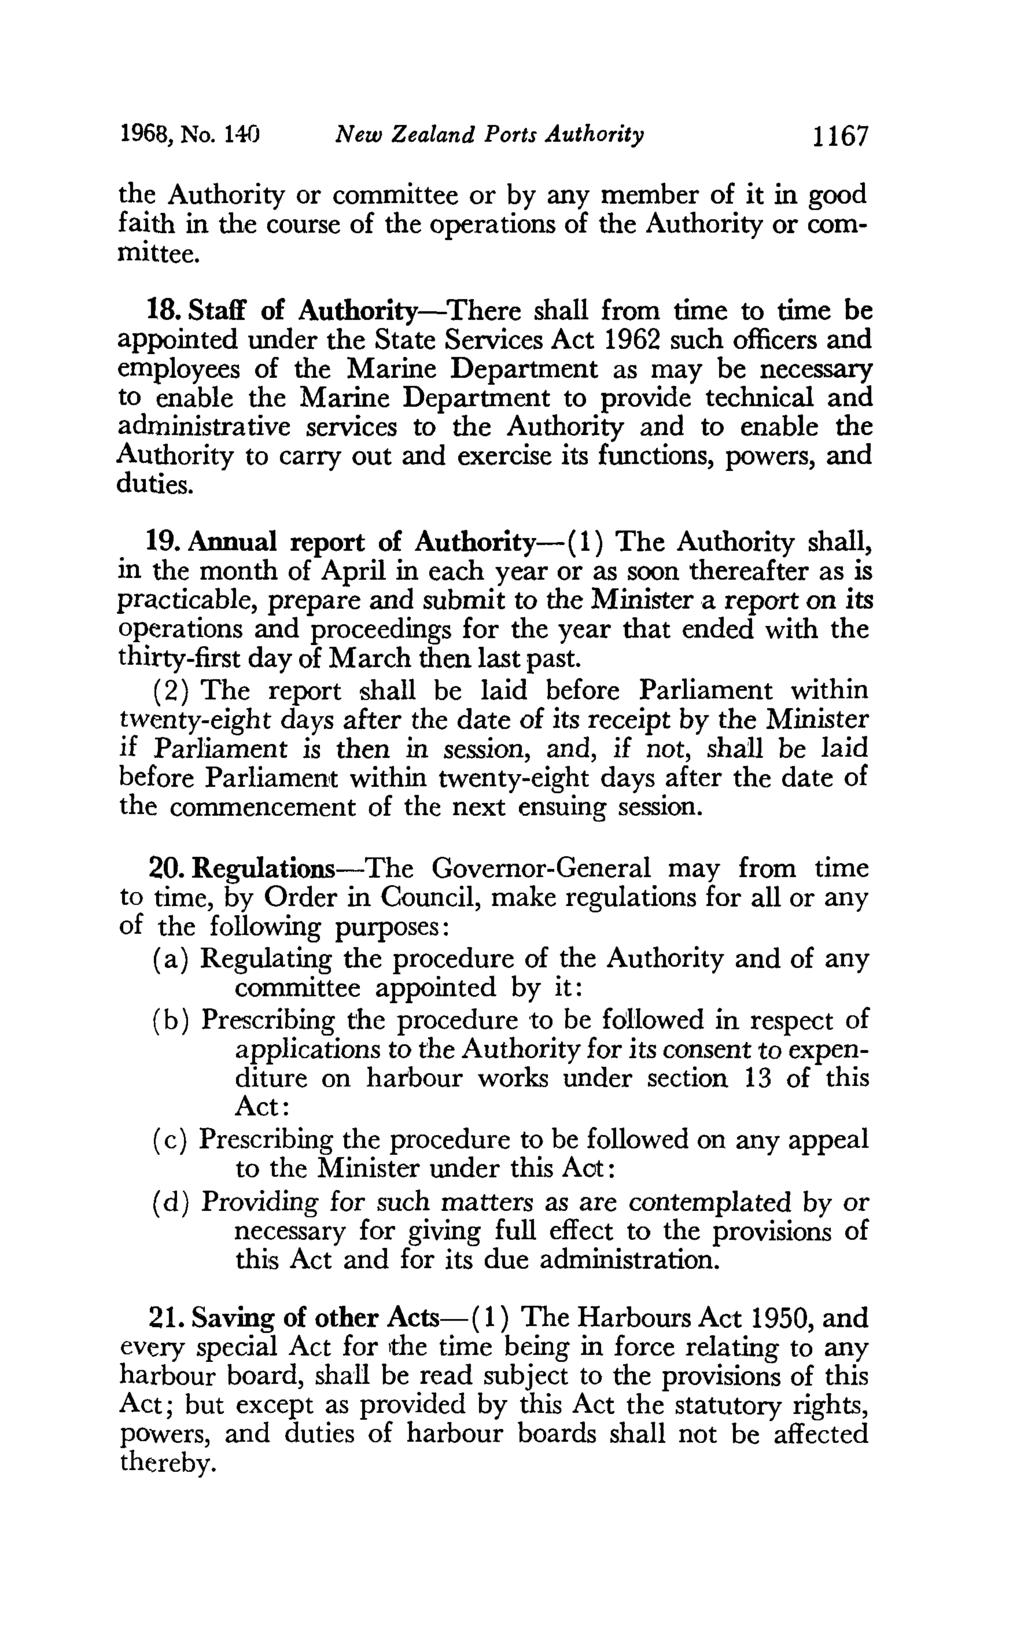 1968, No. 140 New Zealand Ports Authority 1167 the Authority or committee or by any member of it in good faith in the course of the operations of the Authority or committee. 18.